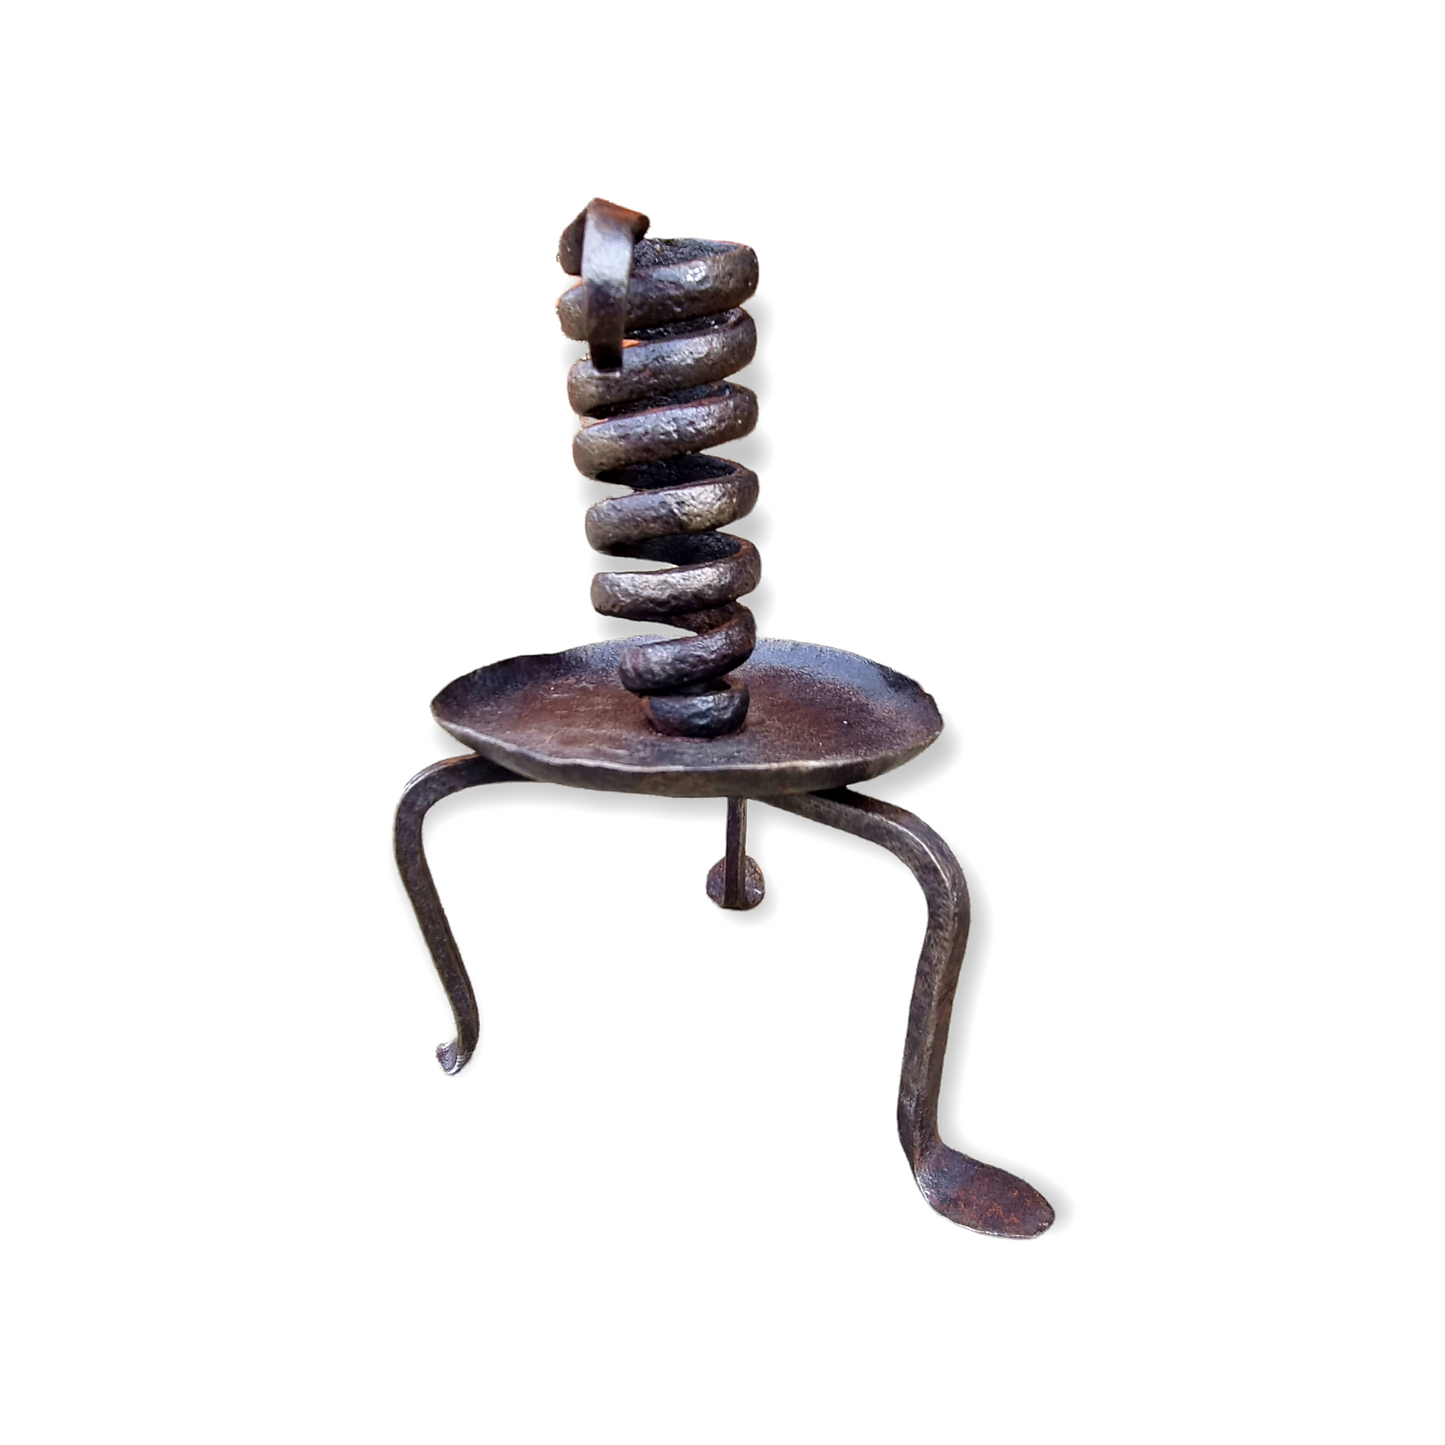 Late 18th Century Primitive Antique Wrought Iron Candleholder or Rat Tail Candleholder